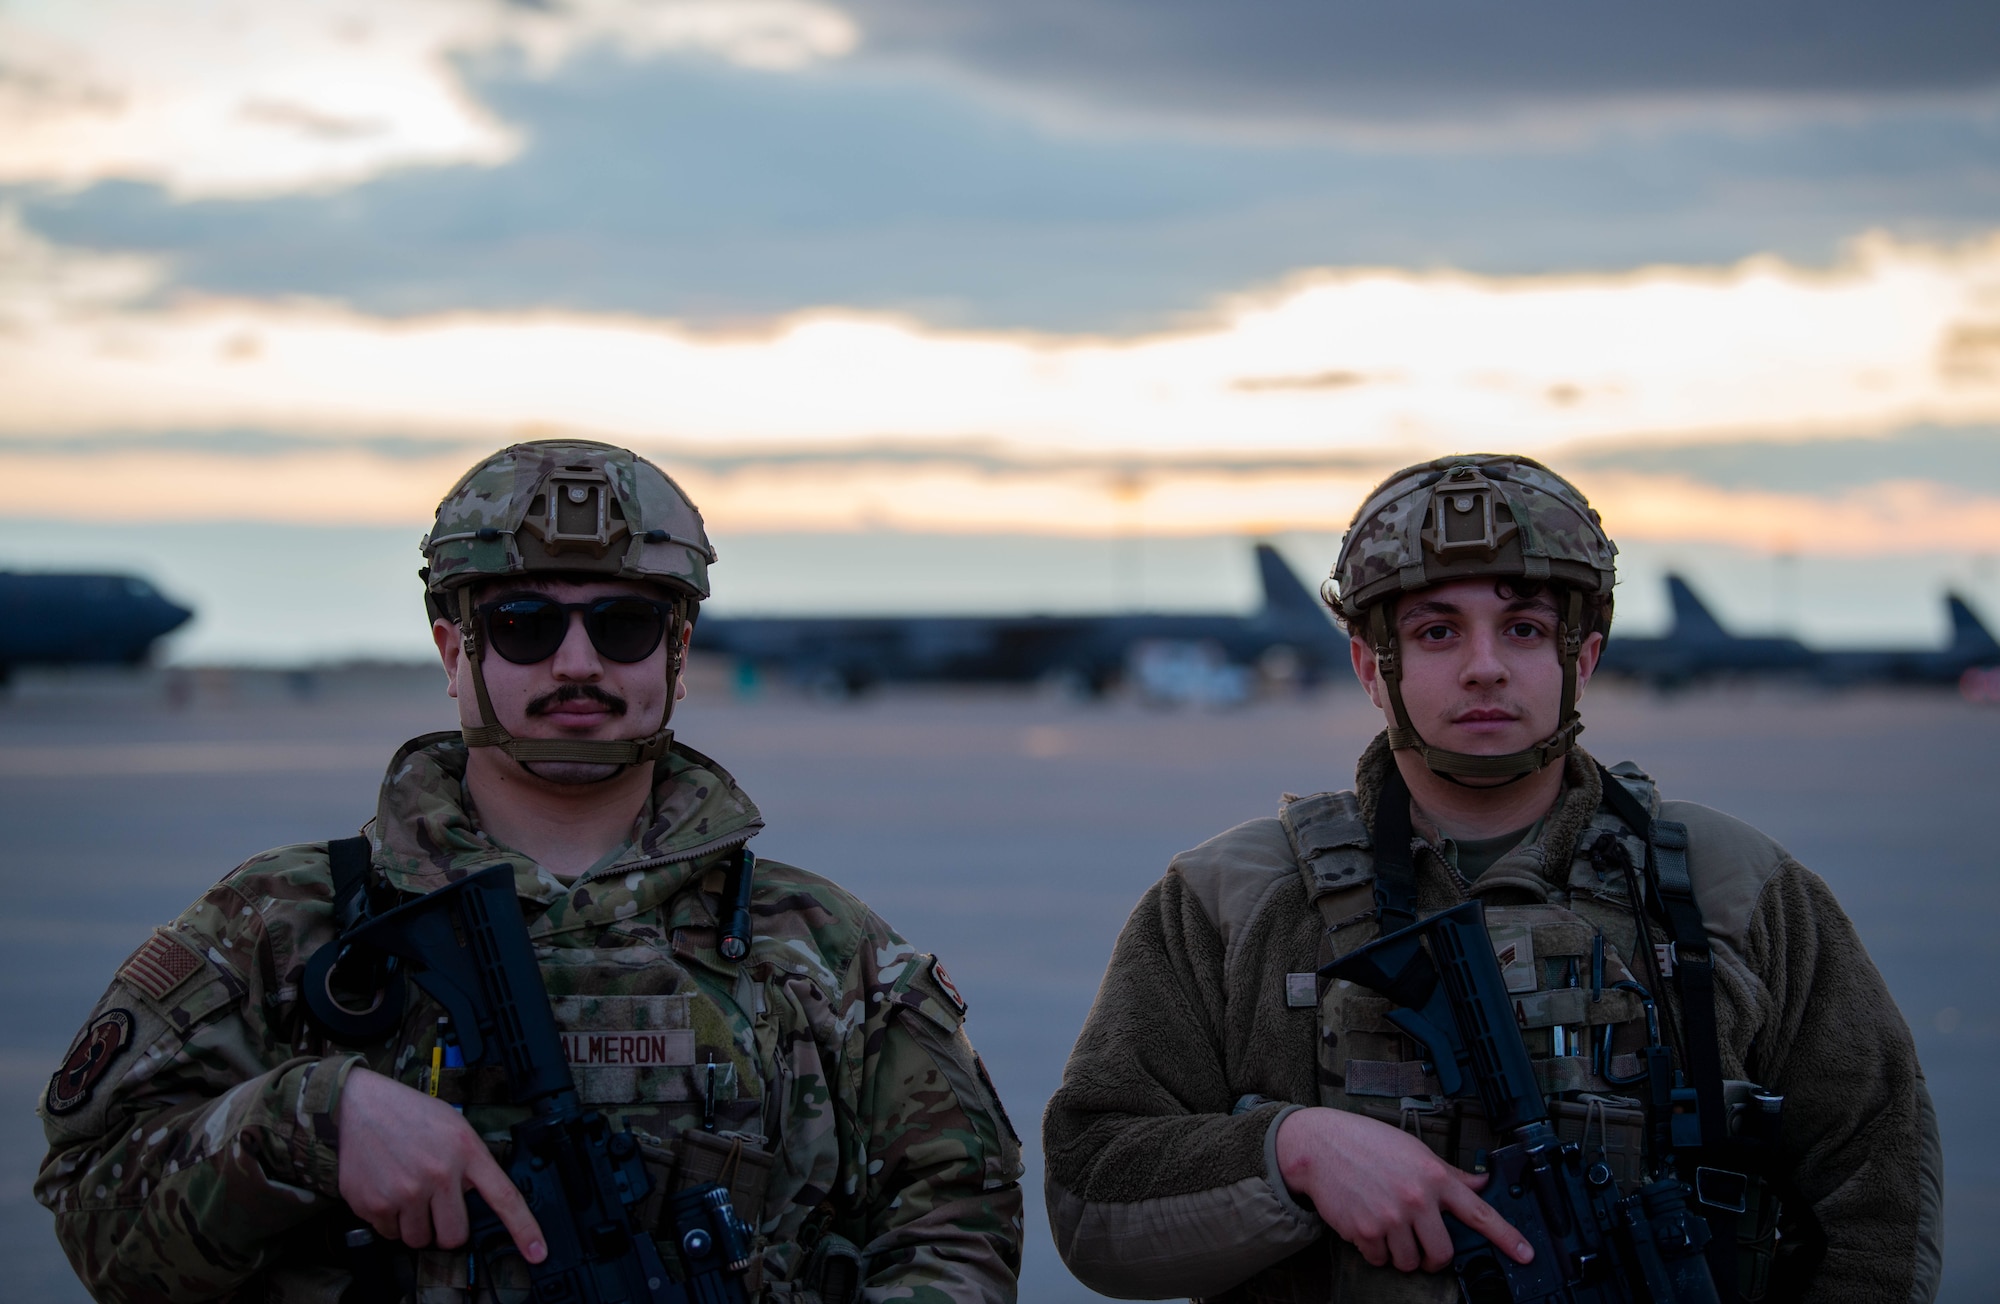 Airman Jonathan Salmeron, 5th Security Forces Squadron defender, (left) and Senior Airman Jose Soiza, 5th Security Forces Squadron defender, pose on the flightline during Exercise Prairie Vigilance/Bayou Vigilance 24-3 at Minot Air Force Base, North Dakota, April 8, 2024. Exercises like Prairie Vigilance continually develop Airmen and aircrew skill sets by improving operational capabilities and increasing mission readiness. (U.S. Air Force photo by Airman 1st Class Luis Gomez)